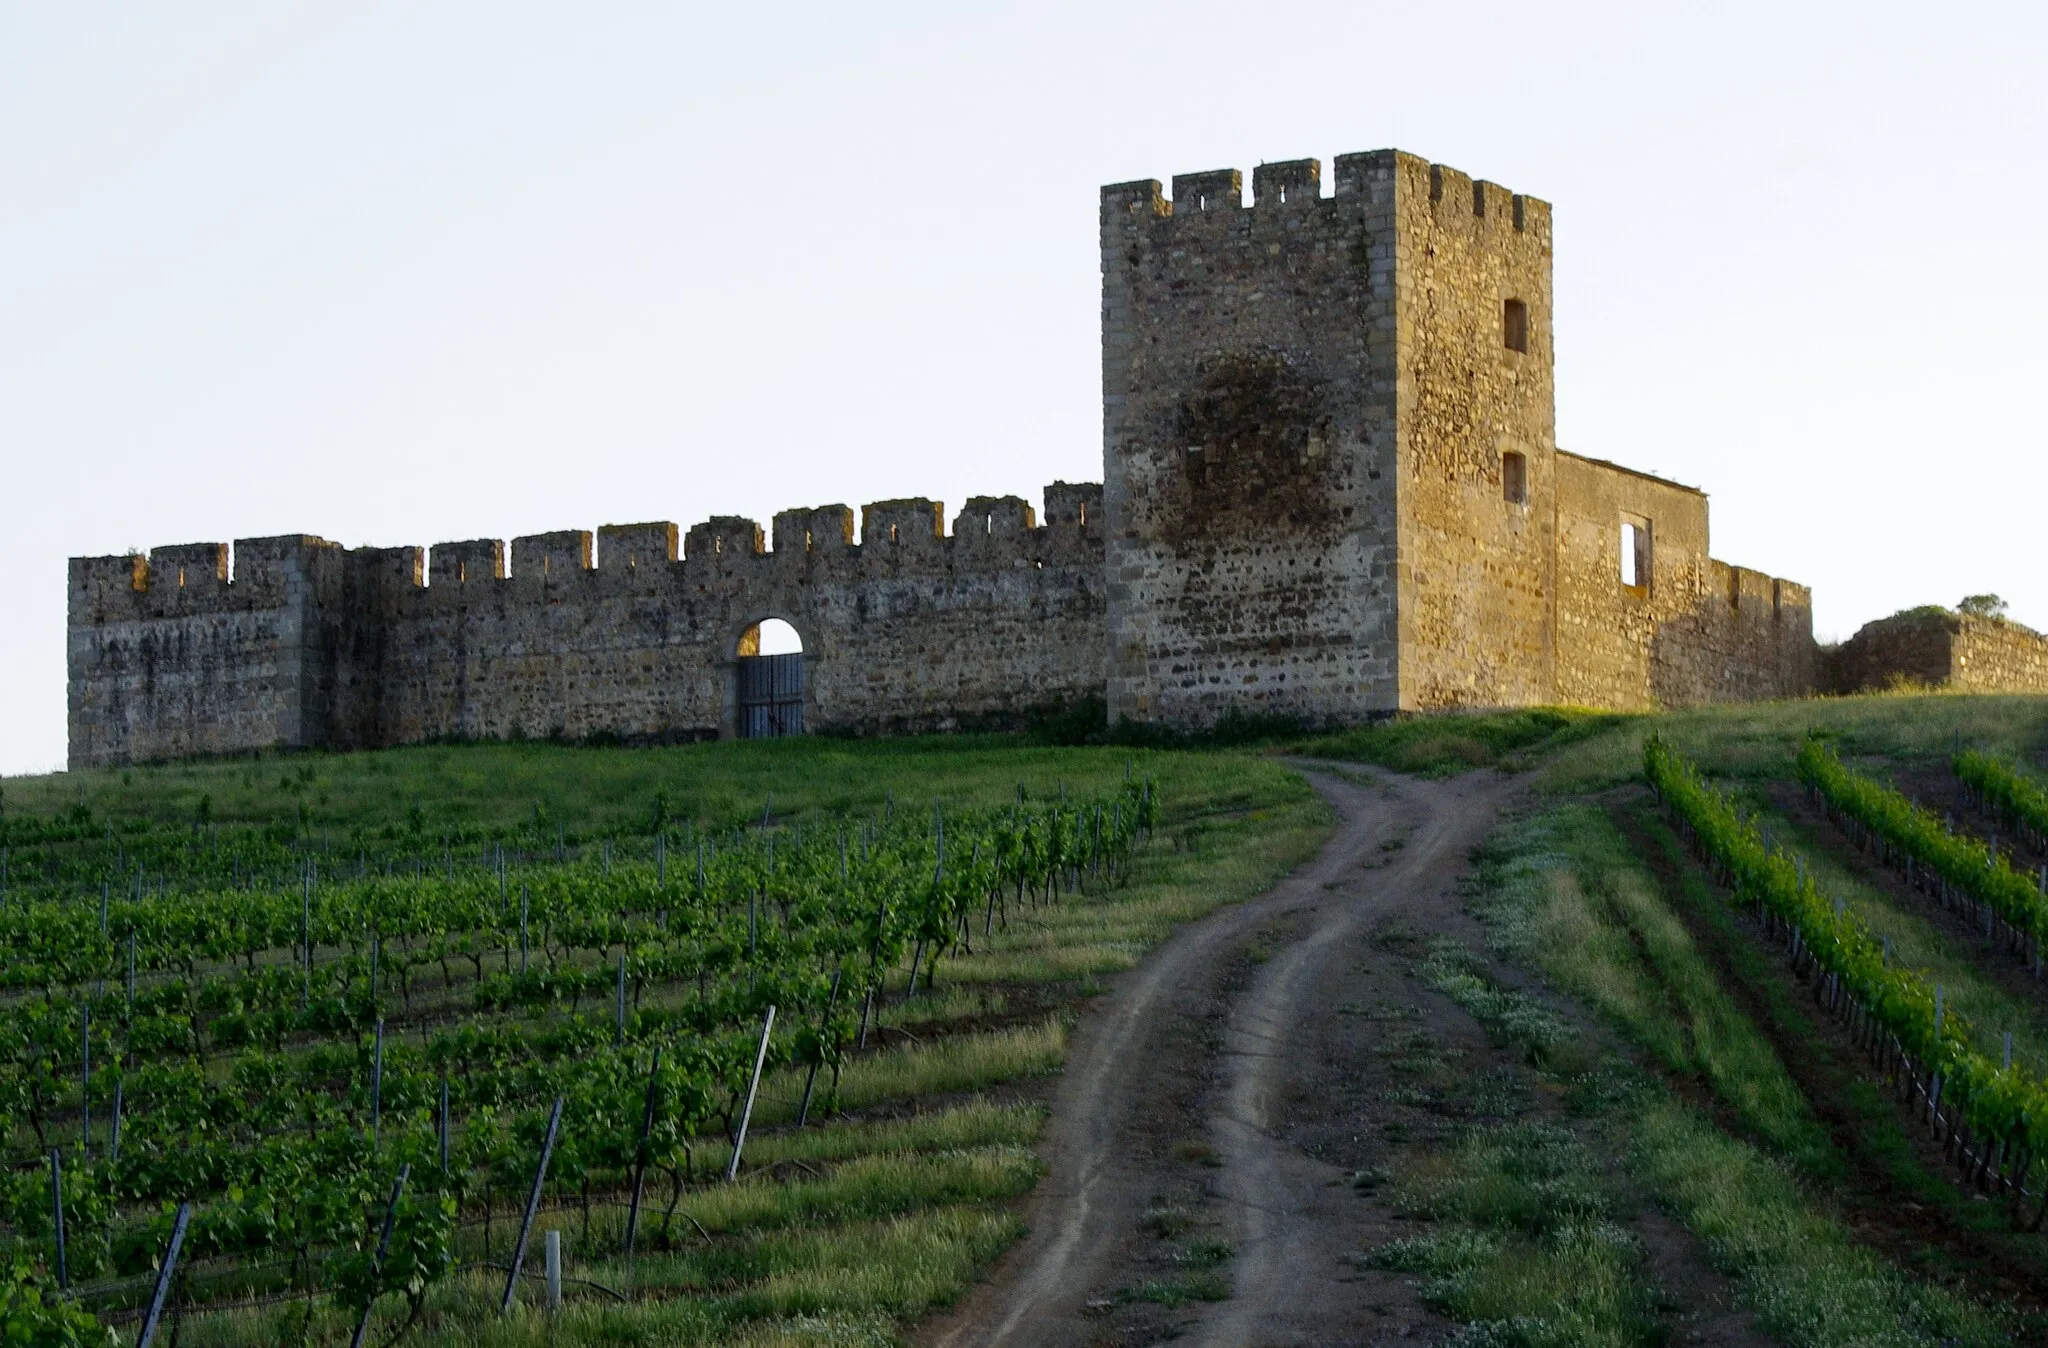 Photo showing: The "Castle of Valongo" is a classic quadrangular fortress that was built around 1250 on the foundations of a much older building.  The tall Medieval tower on the corner dates from an older Gothic castle and contains numerous Arabic inscriptions.  The castle is now on private property but visitors are welcome to stroll around the outside or (as we did) have a lovely picnic in the shade of the castle walls.  The small castle hill affords lovely views over the vineyards and olive orchards that surround it.